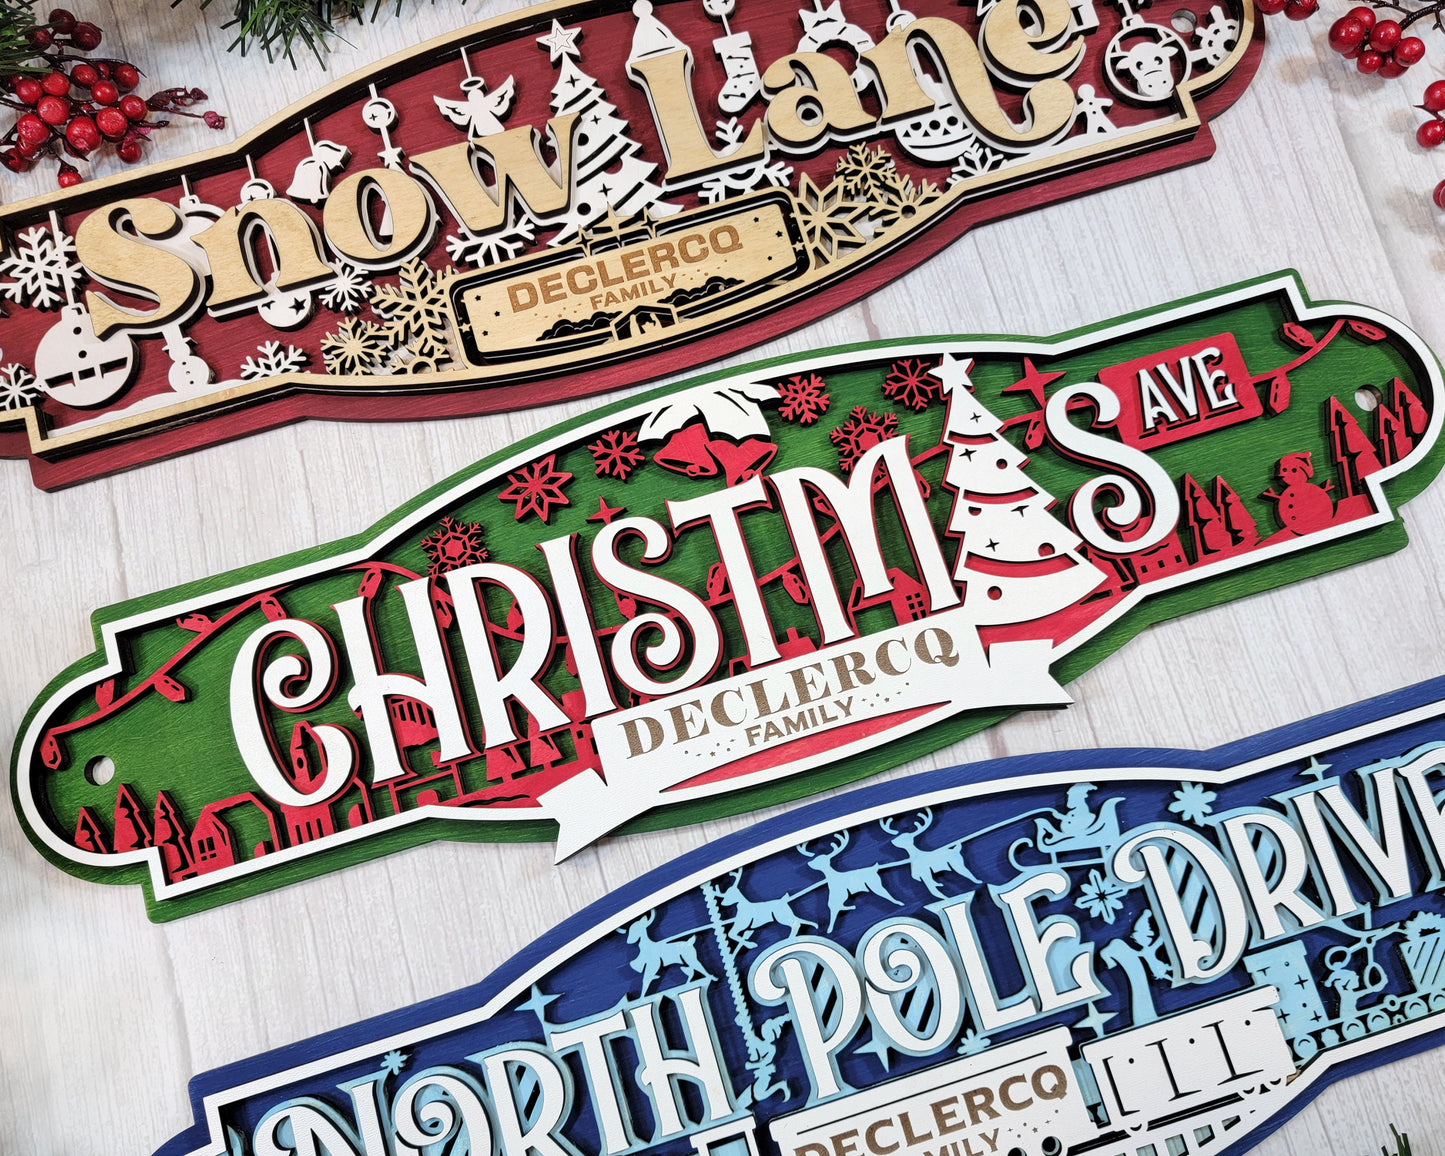 Merry Christmas Street Signs - 3 Street Signs Designs Included - SVG File Download - Sized & Tested in Glowforge